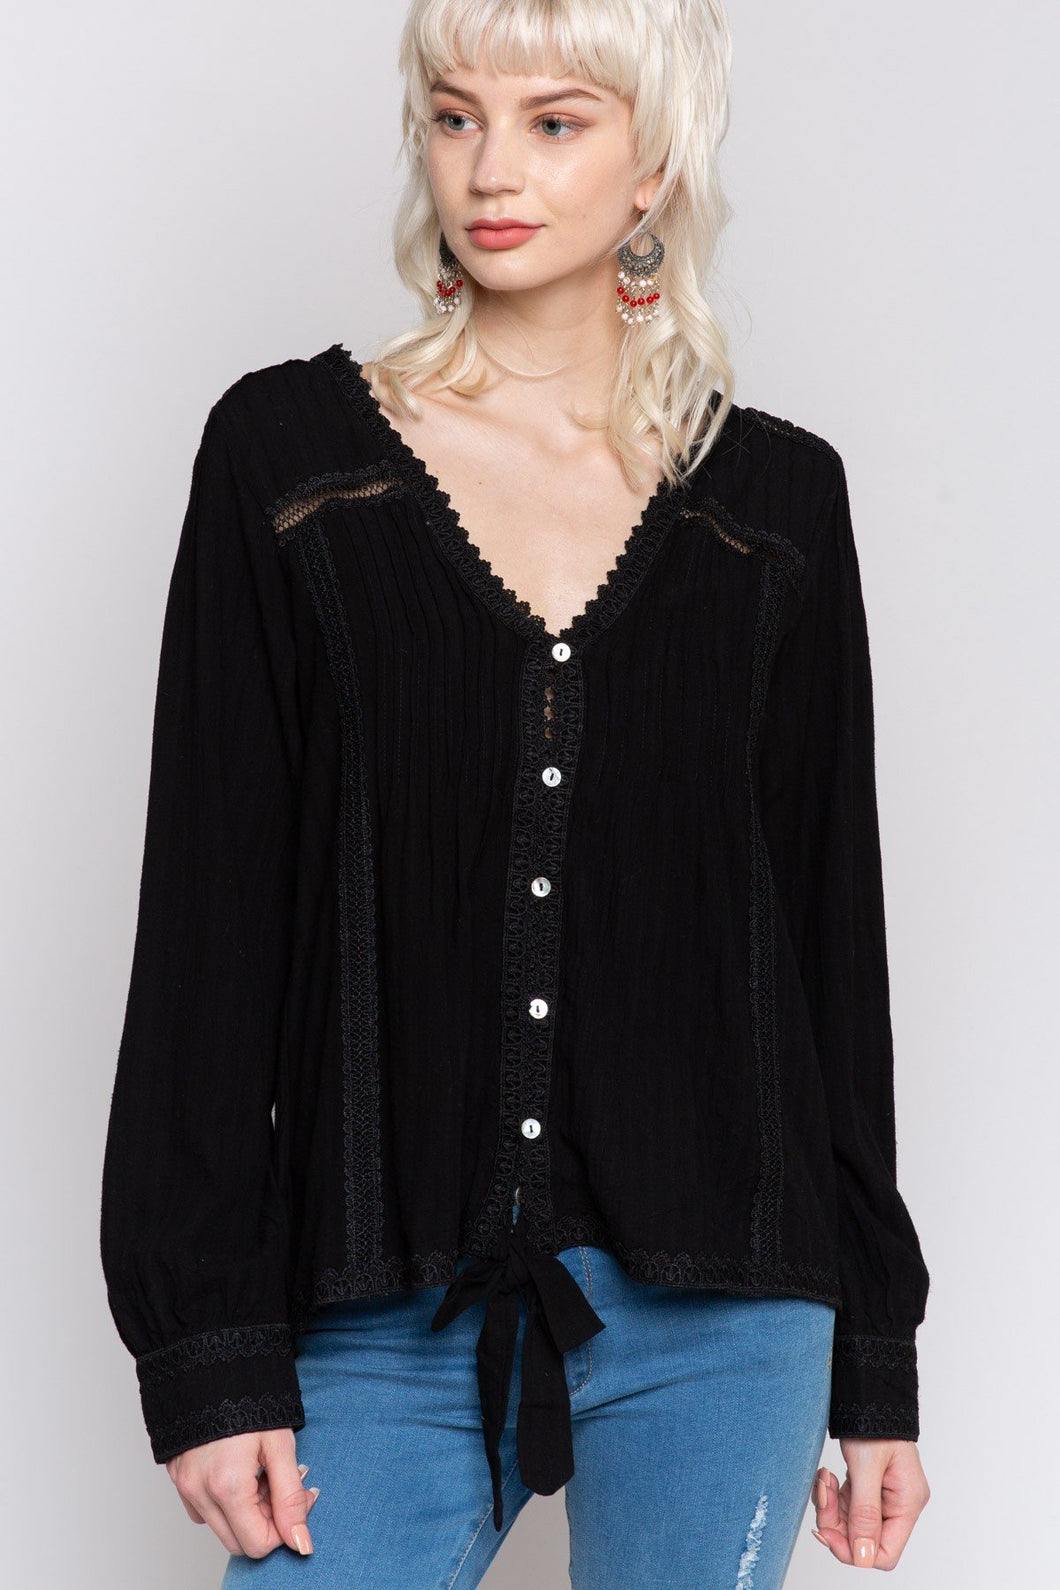 Southern Comfort Woven Top